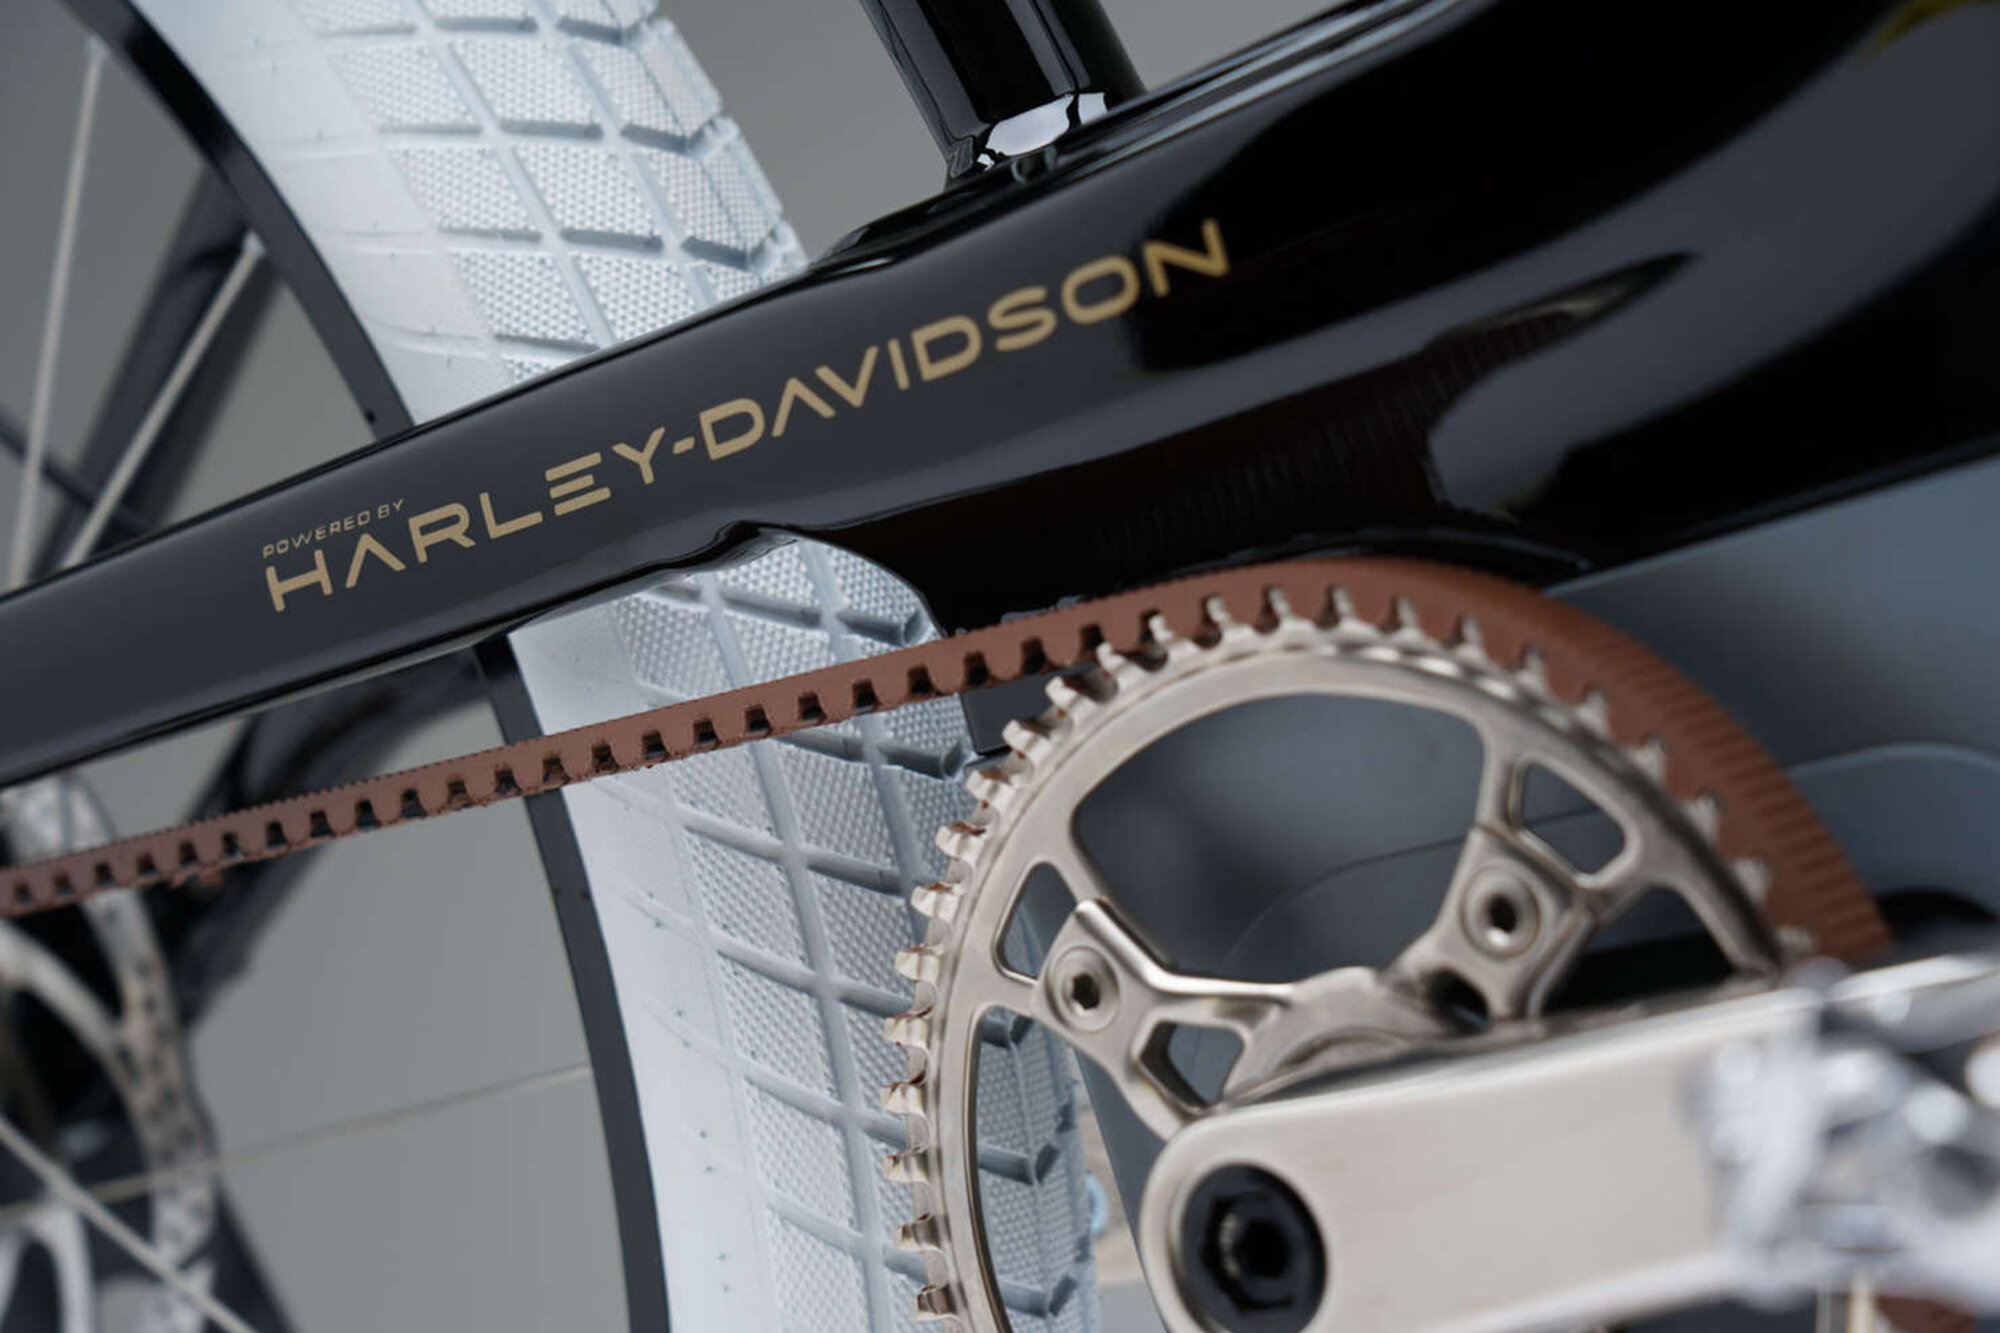 The electric bicycle from Harley-Davidson